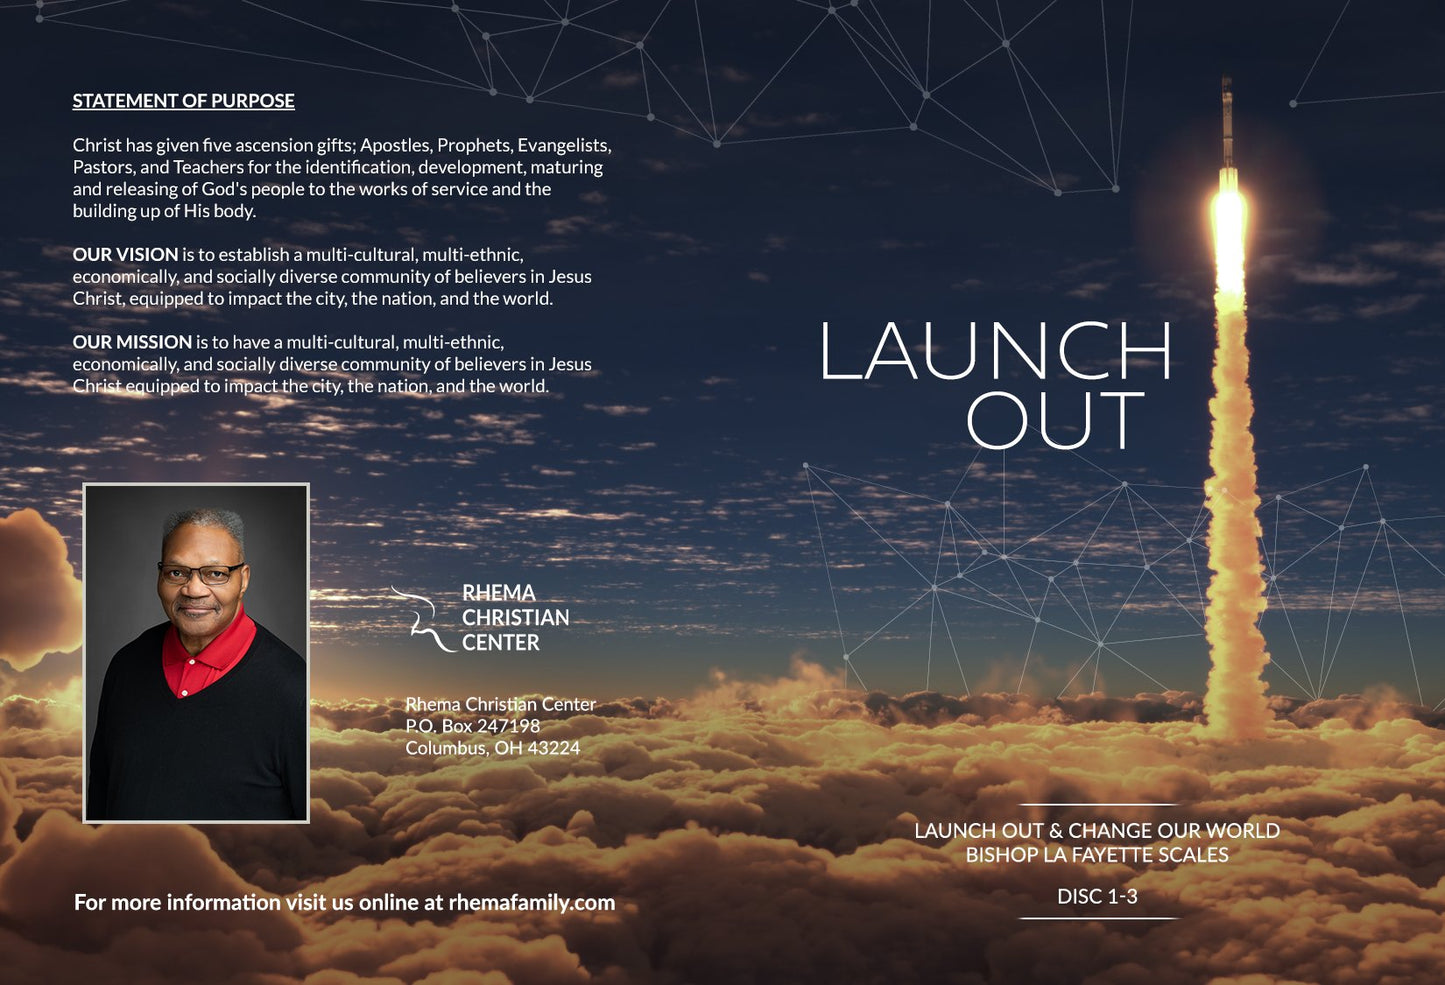 Launch Out (DVD)